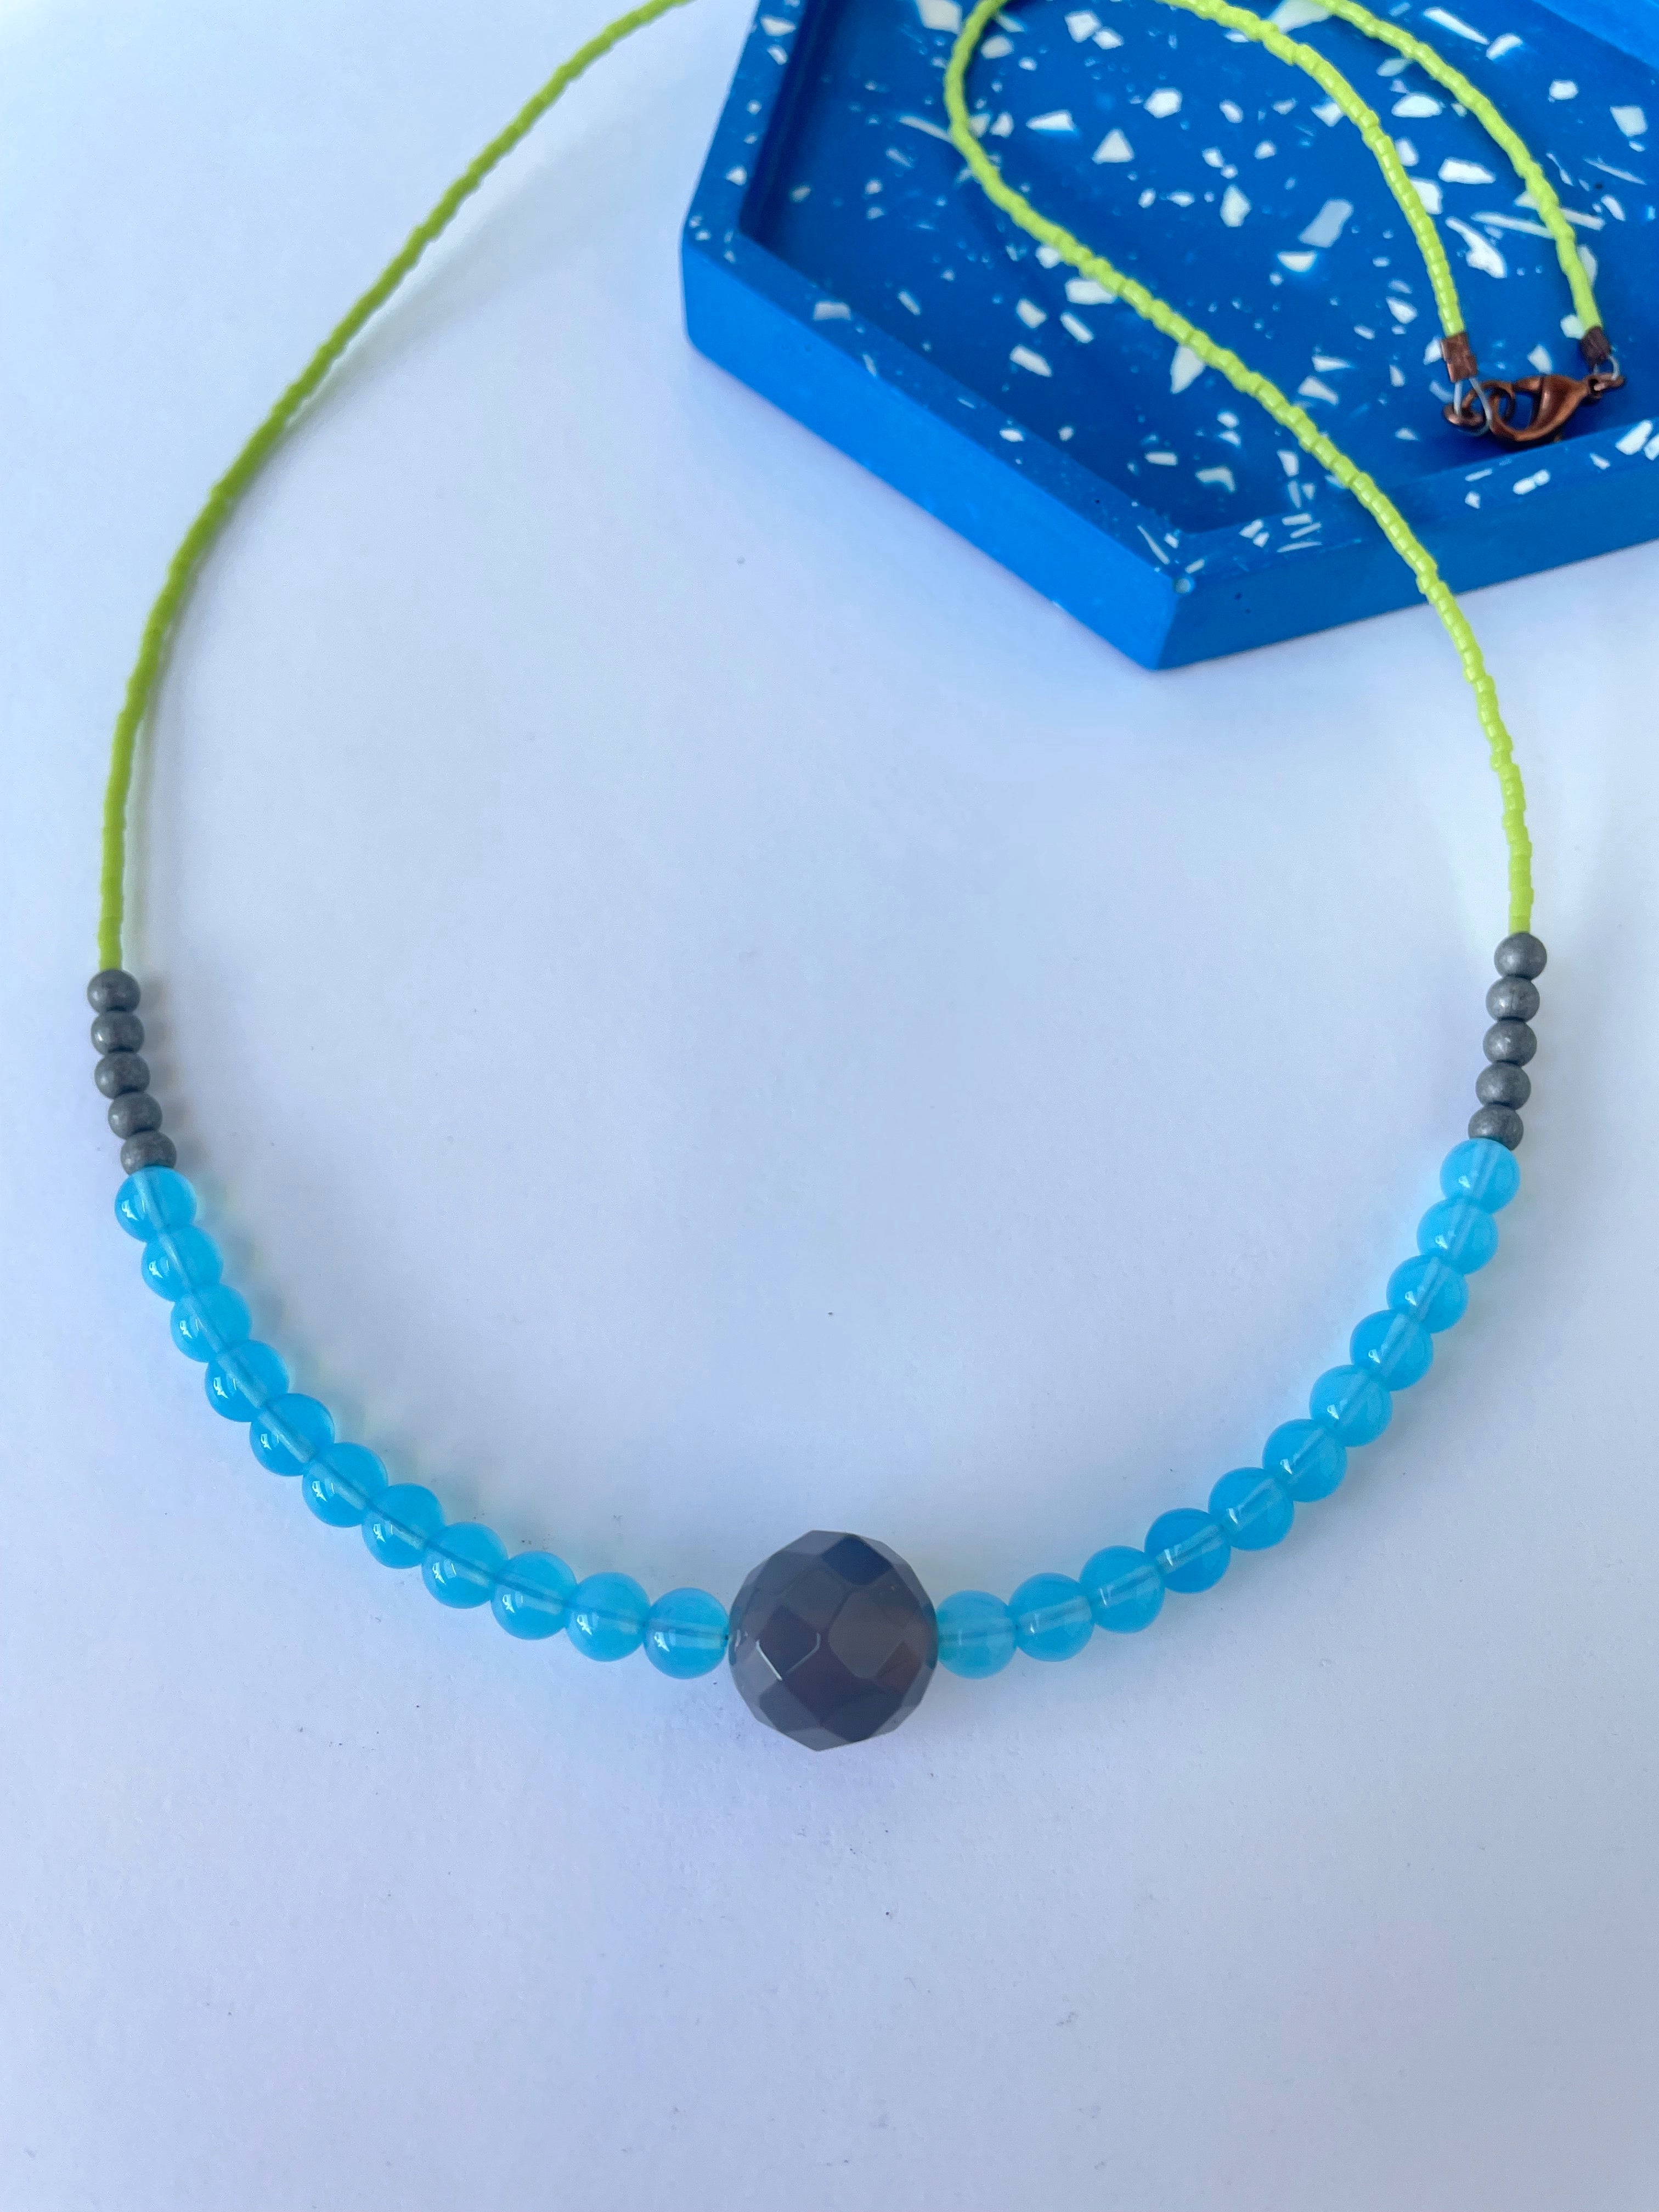 SUPER SECONDS - BEADED NECKLACE